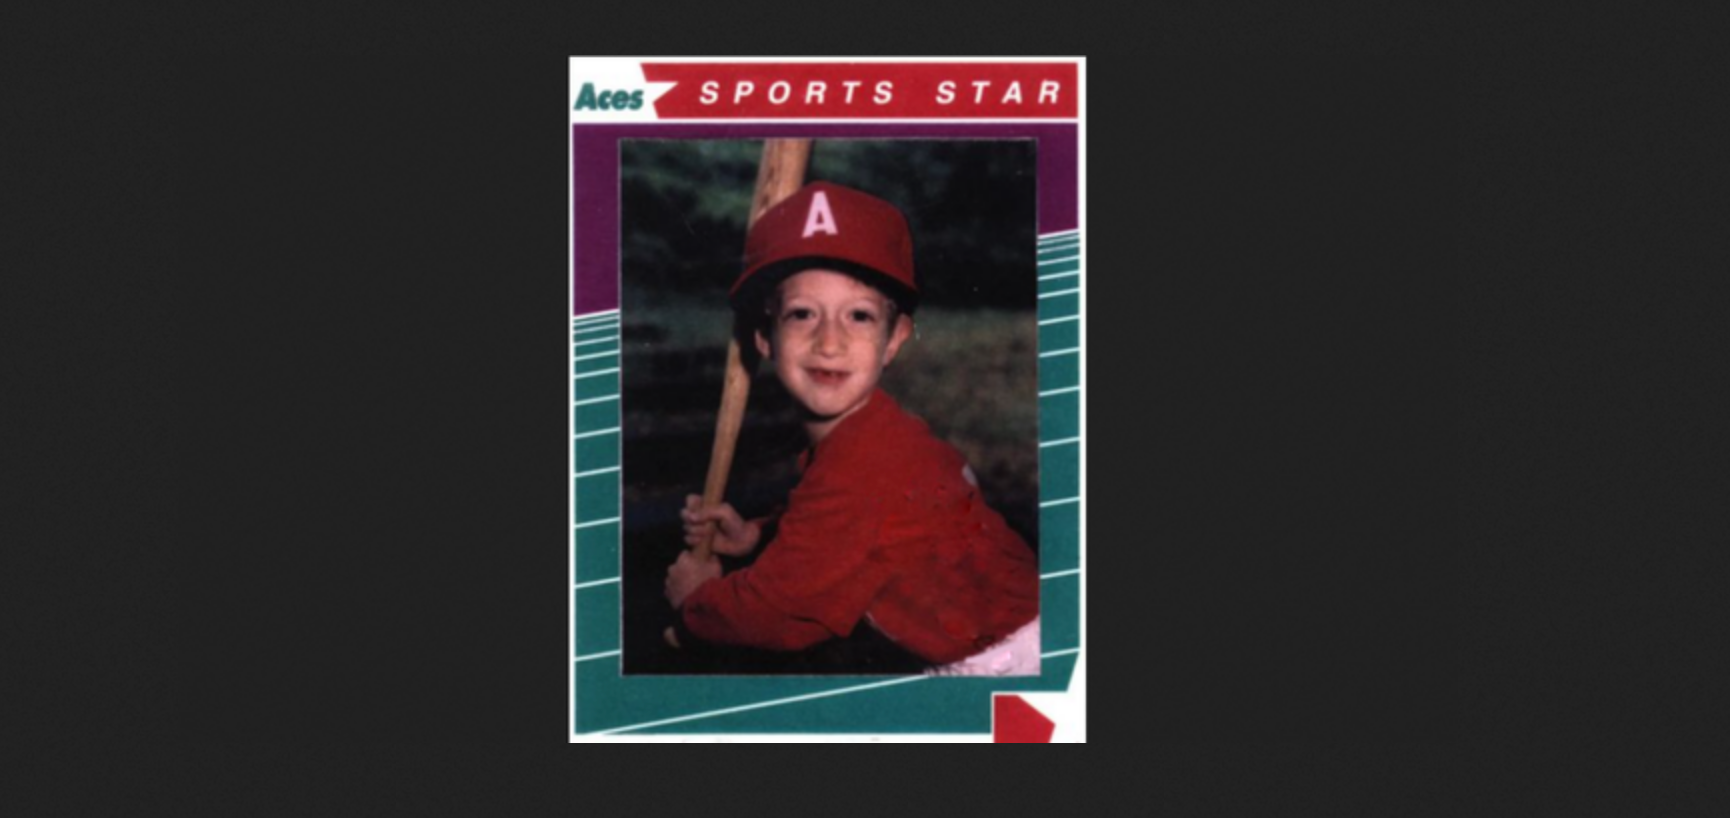 Mark Zuckerberg's Little League Card Just Sold: How Much Did The Item And NFT Go For?